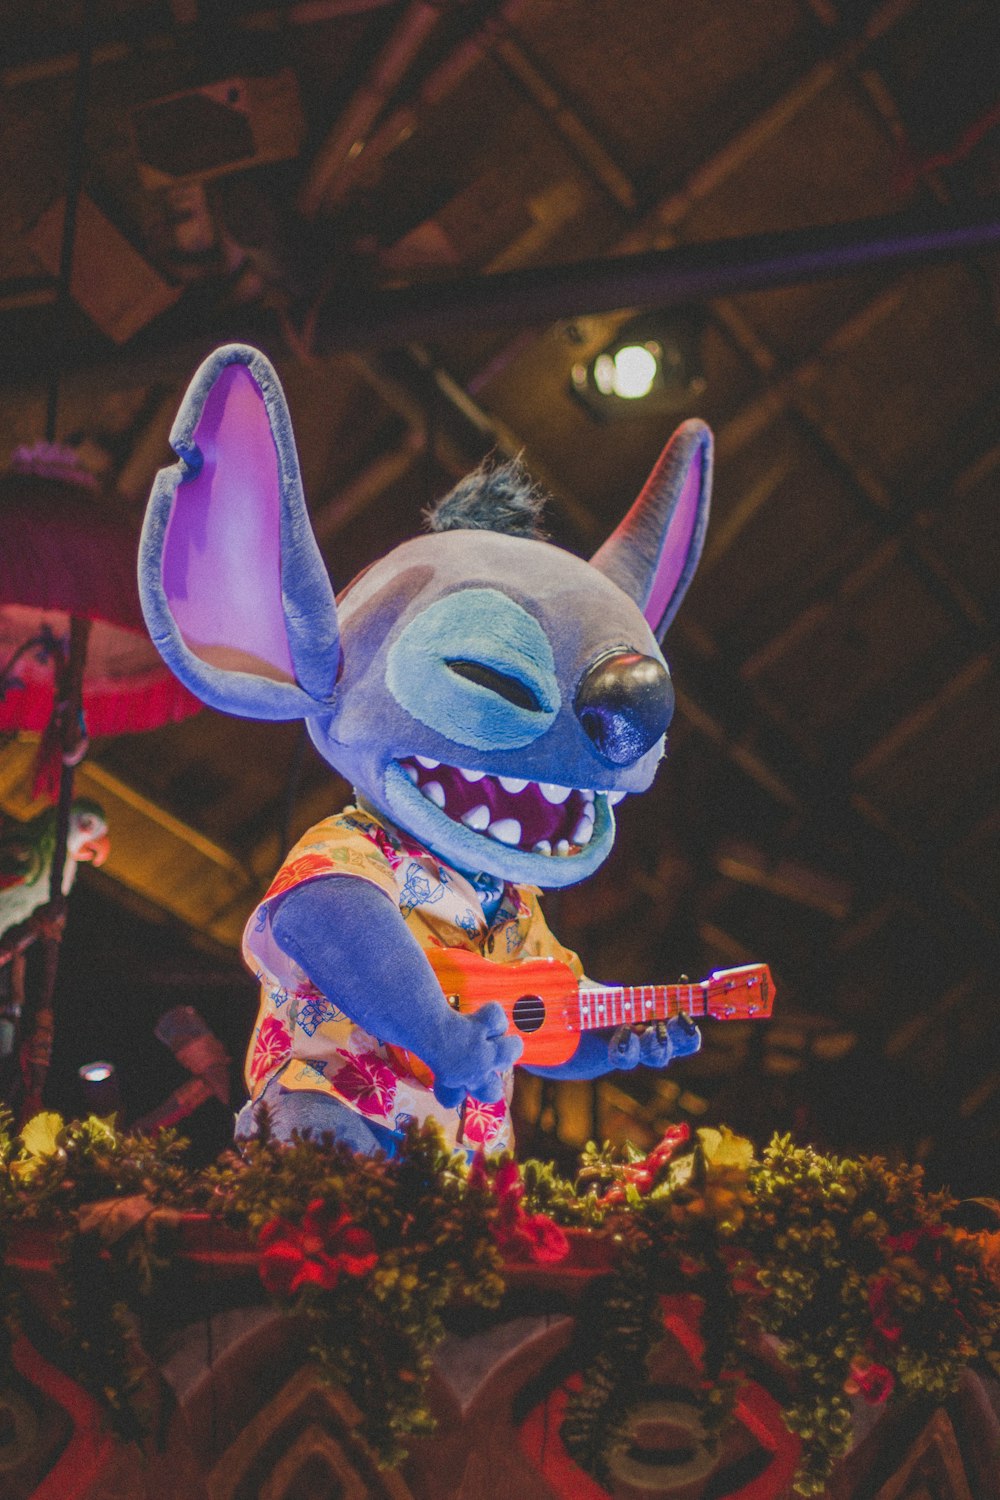 a stuffed animal with a guitar in it's mouth